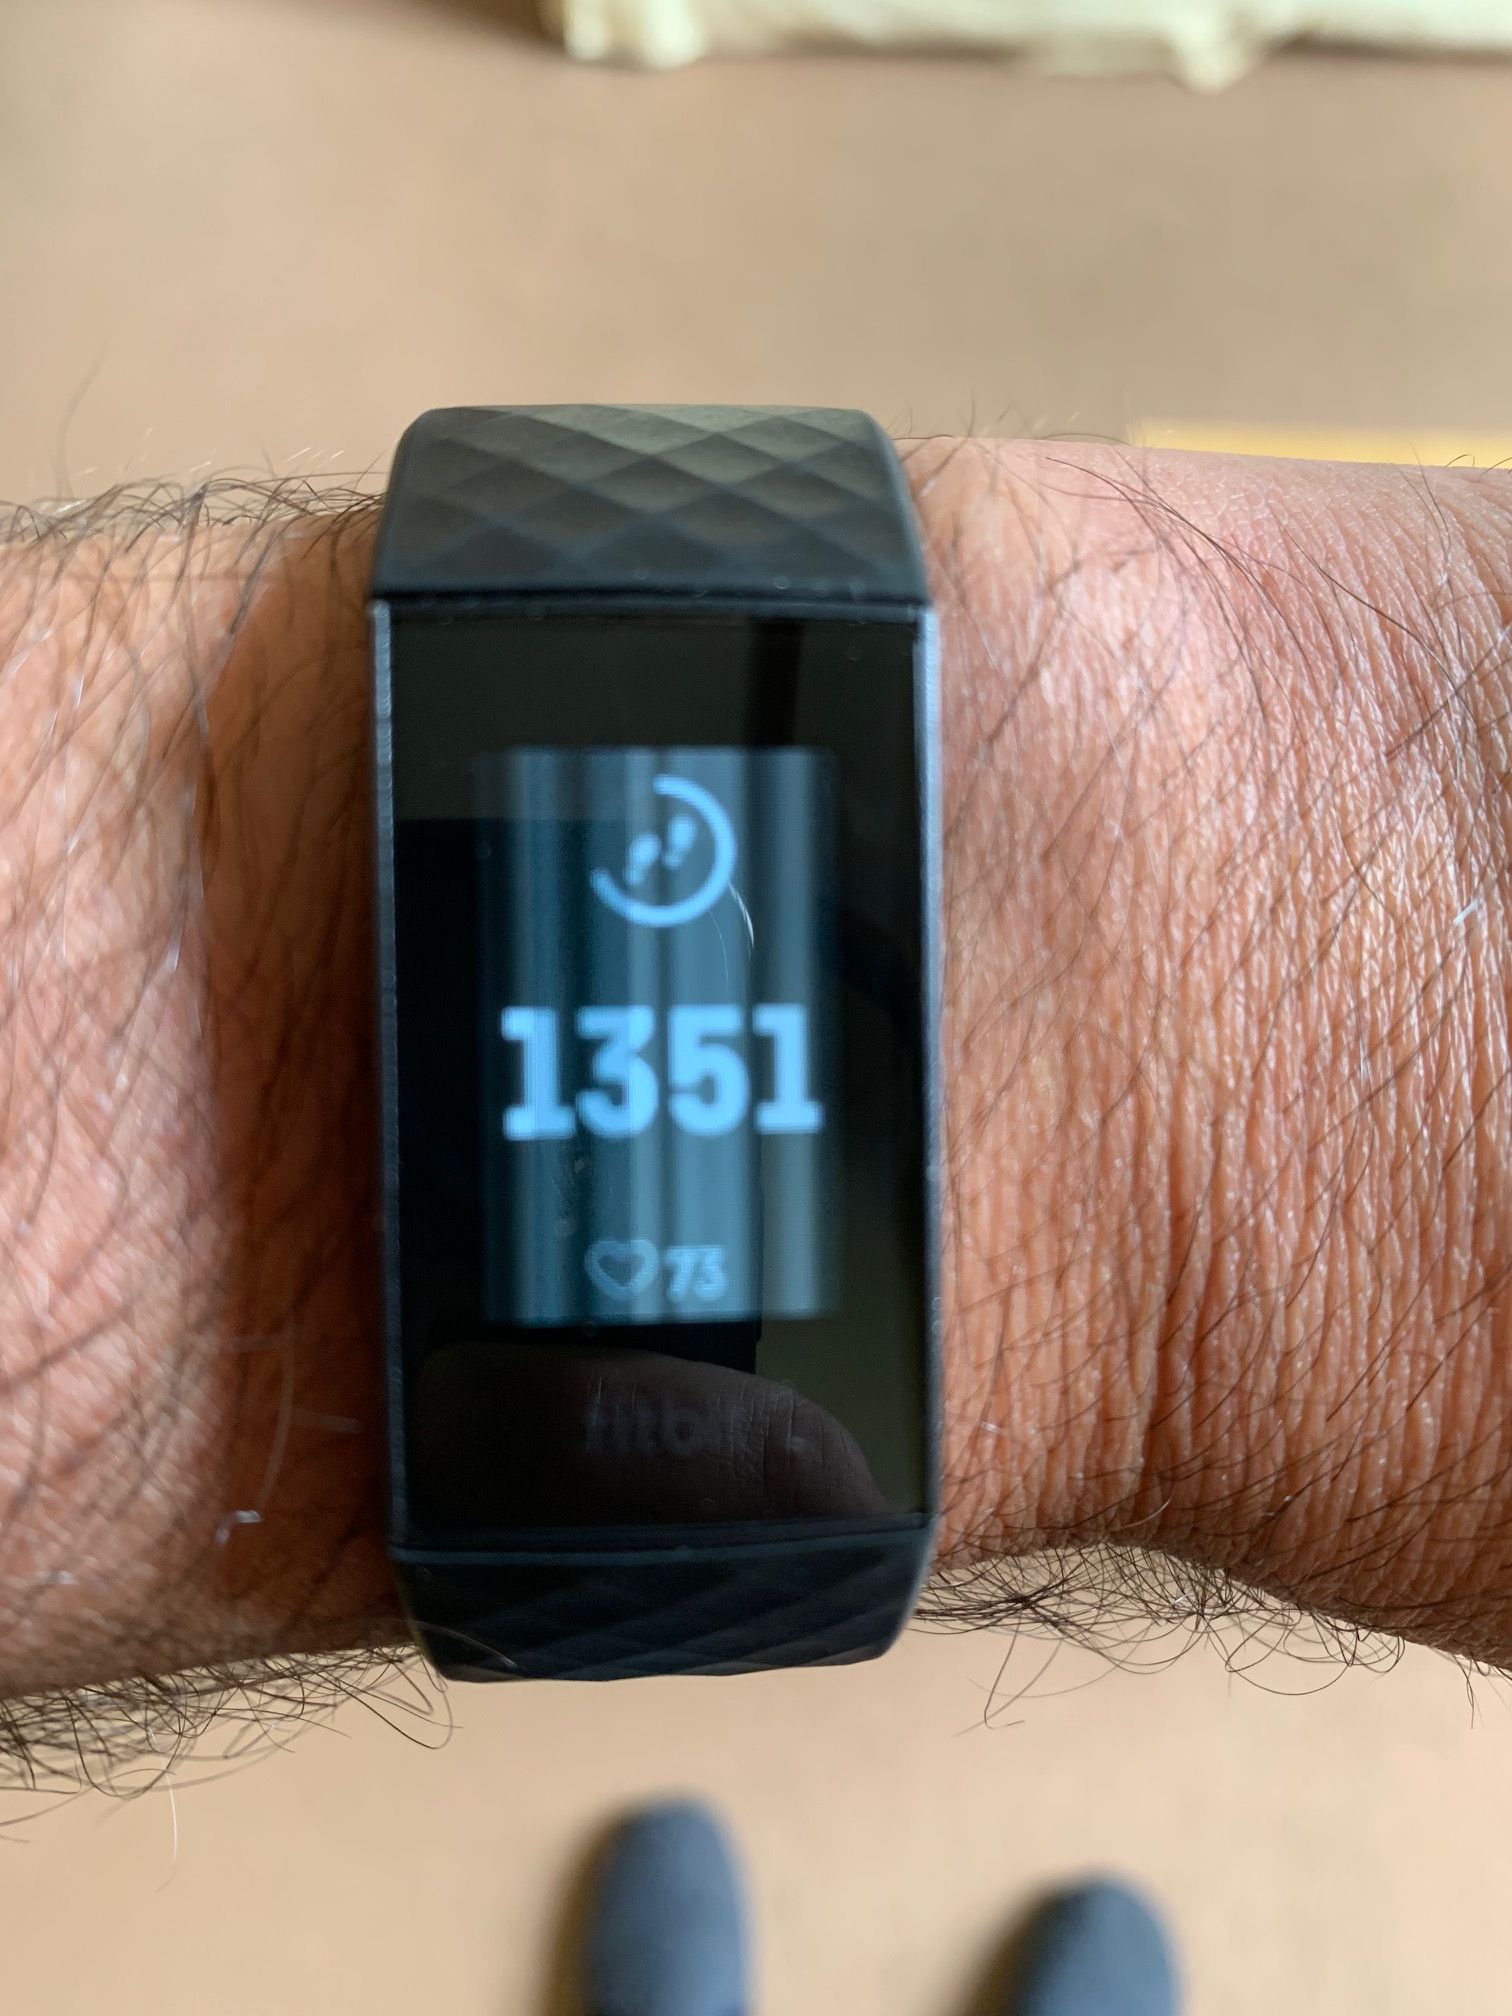 Solved: Charge 3 developed white lines on screen - Fitbit Community